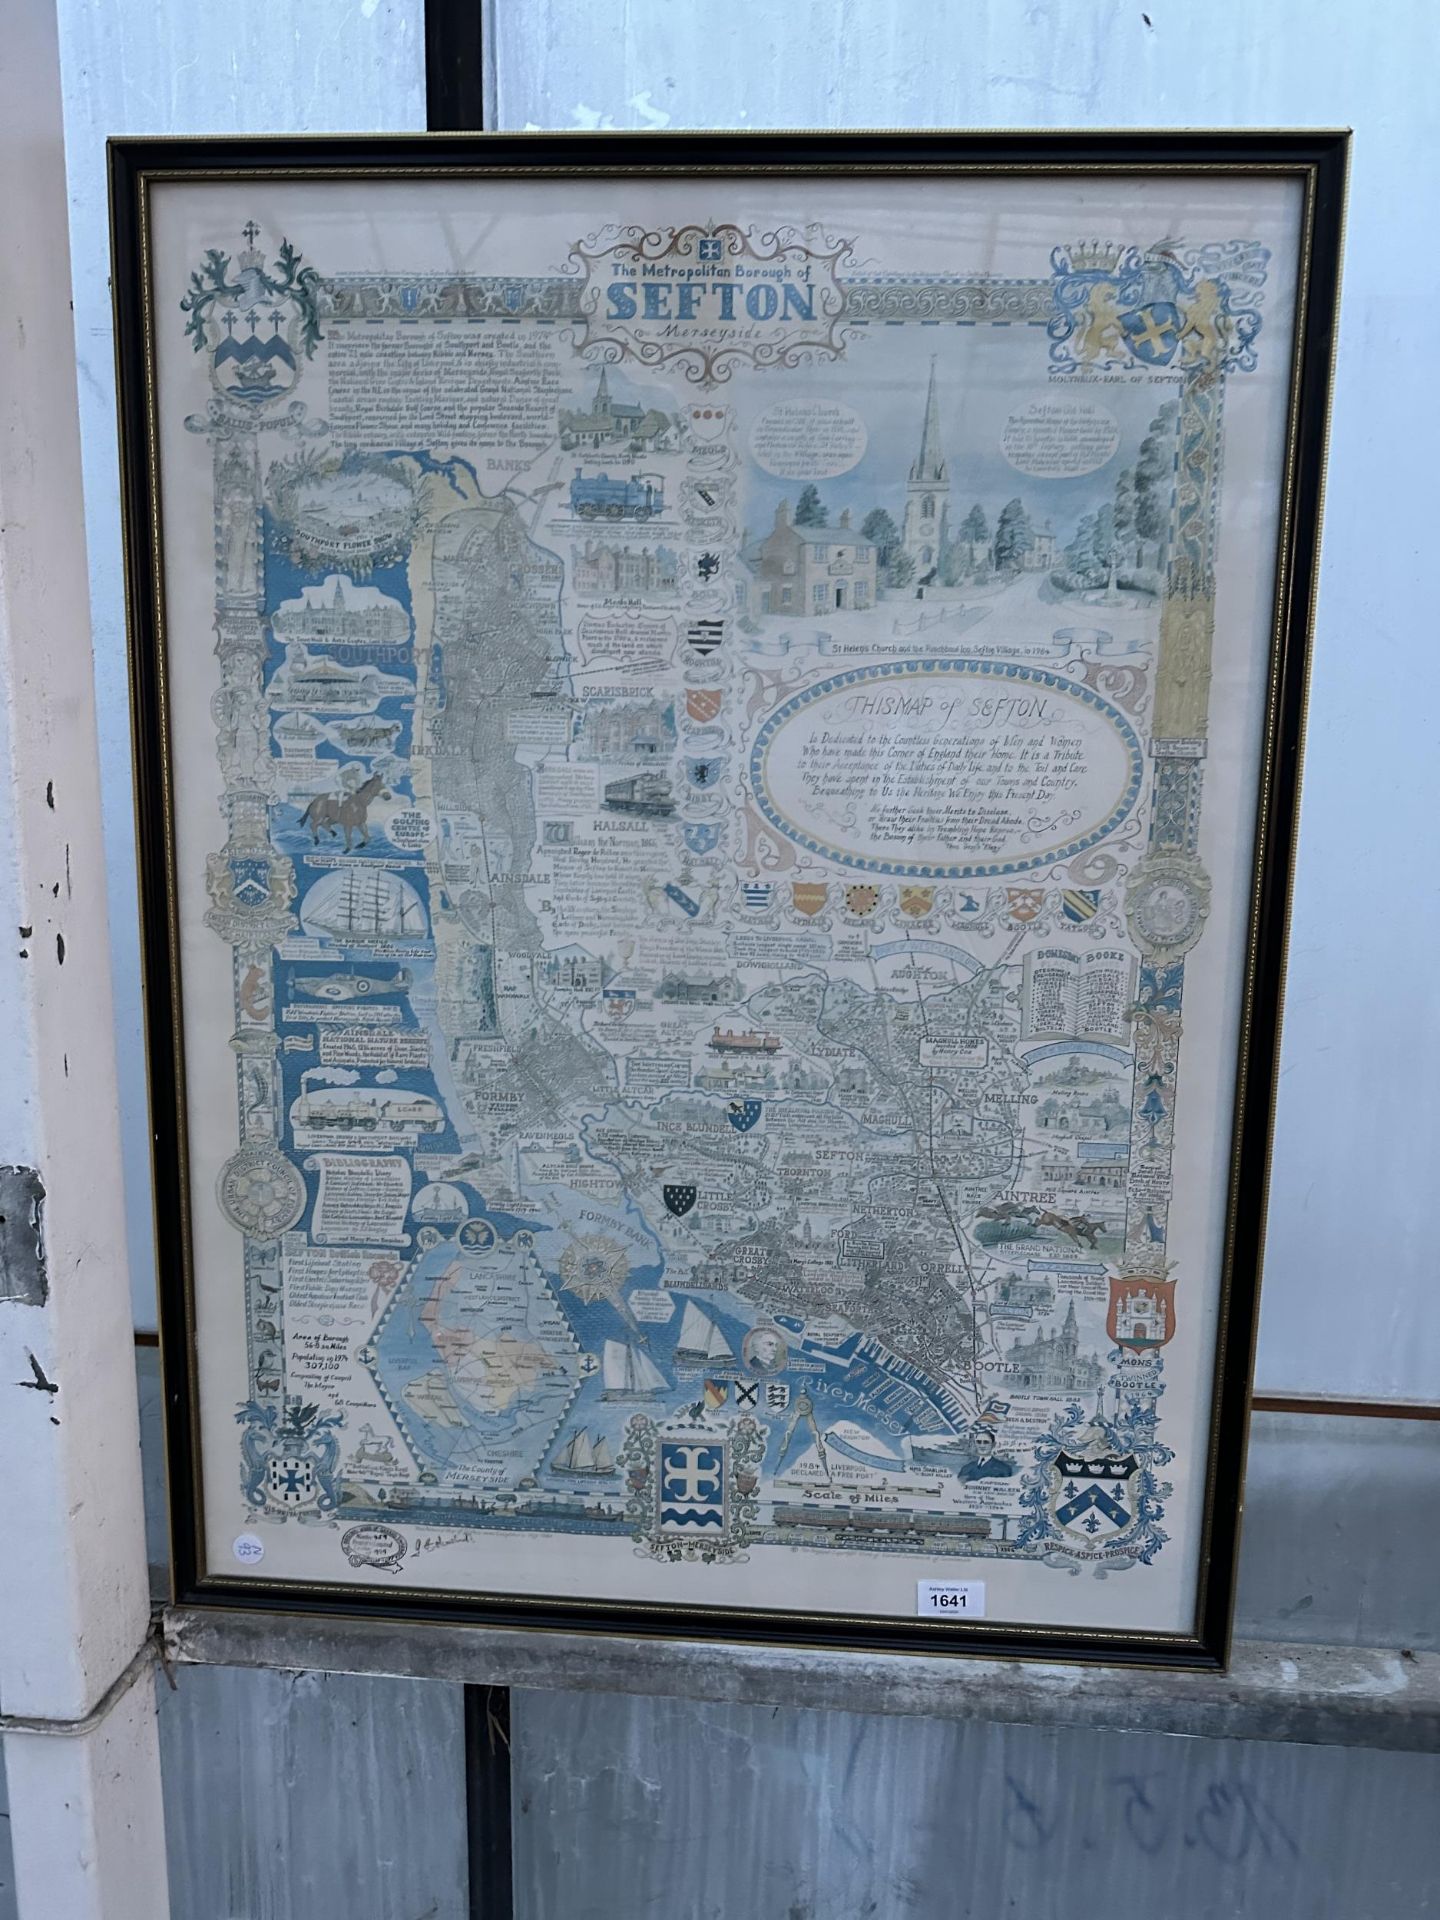 A FRAMED MAP AND HISTORY OF SEFTON